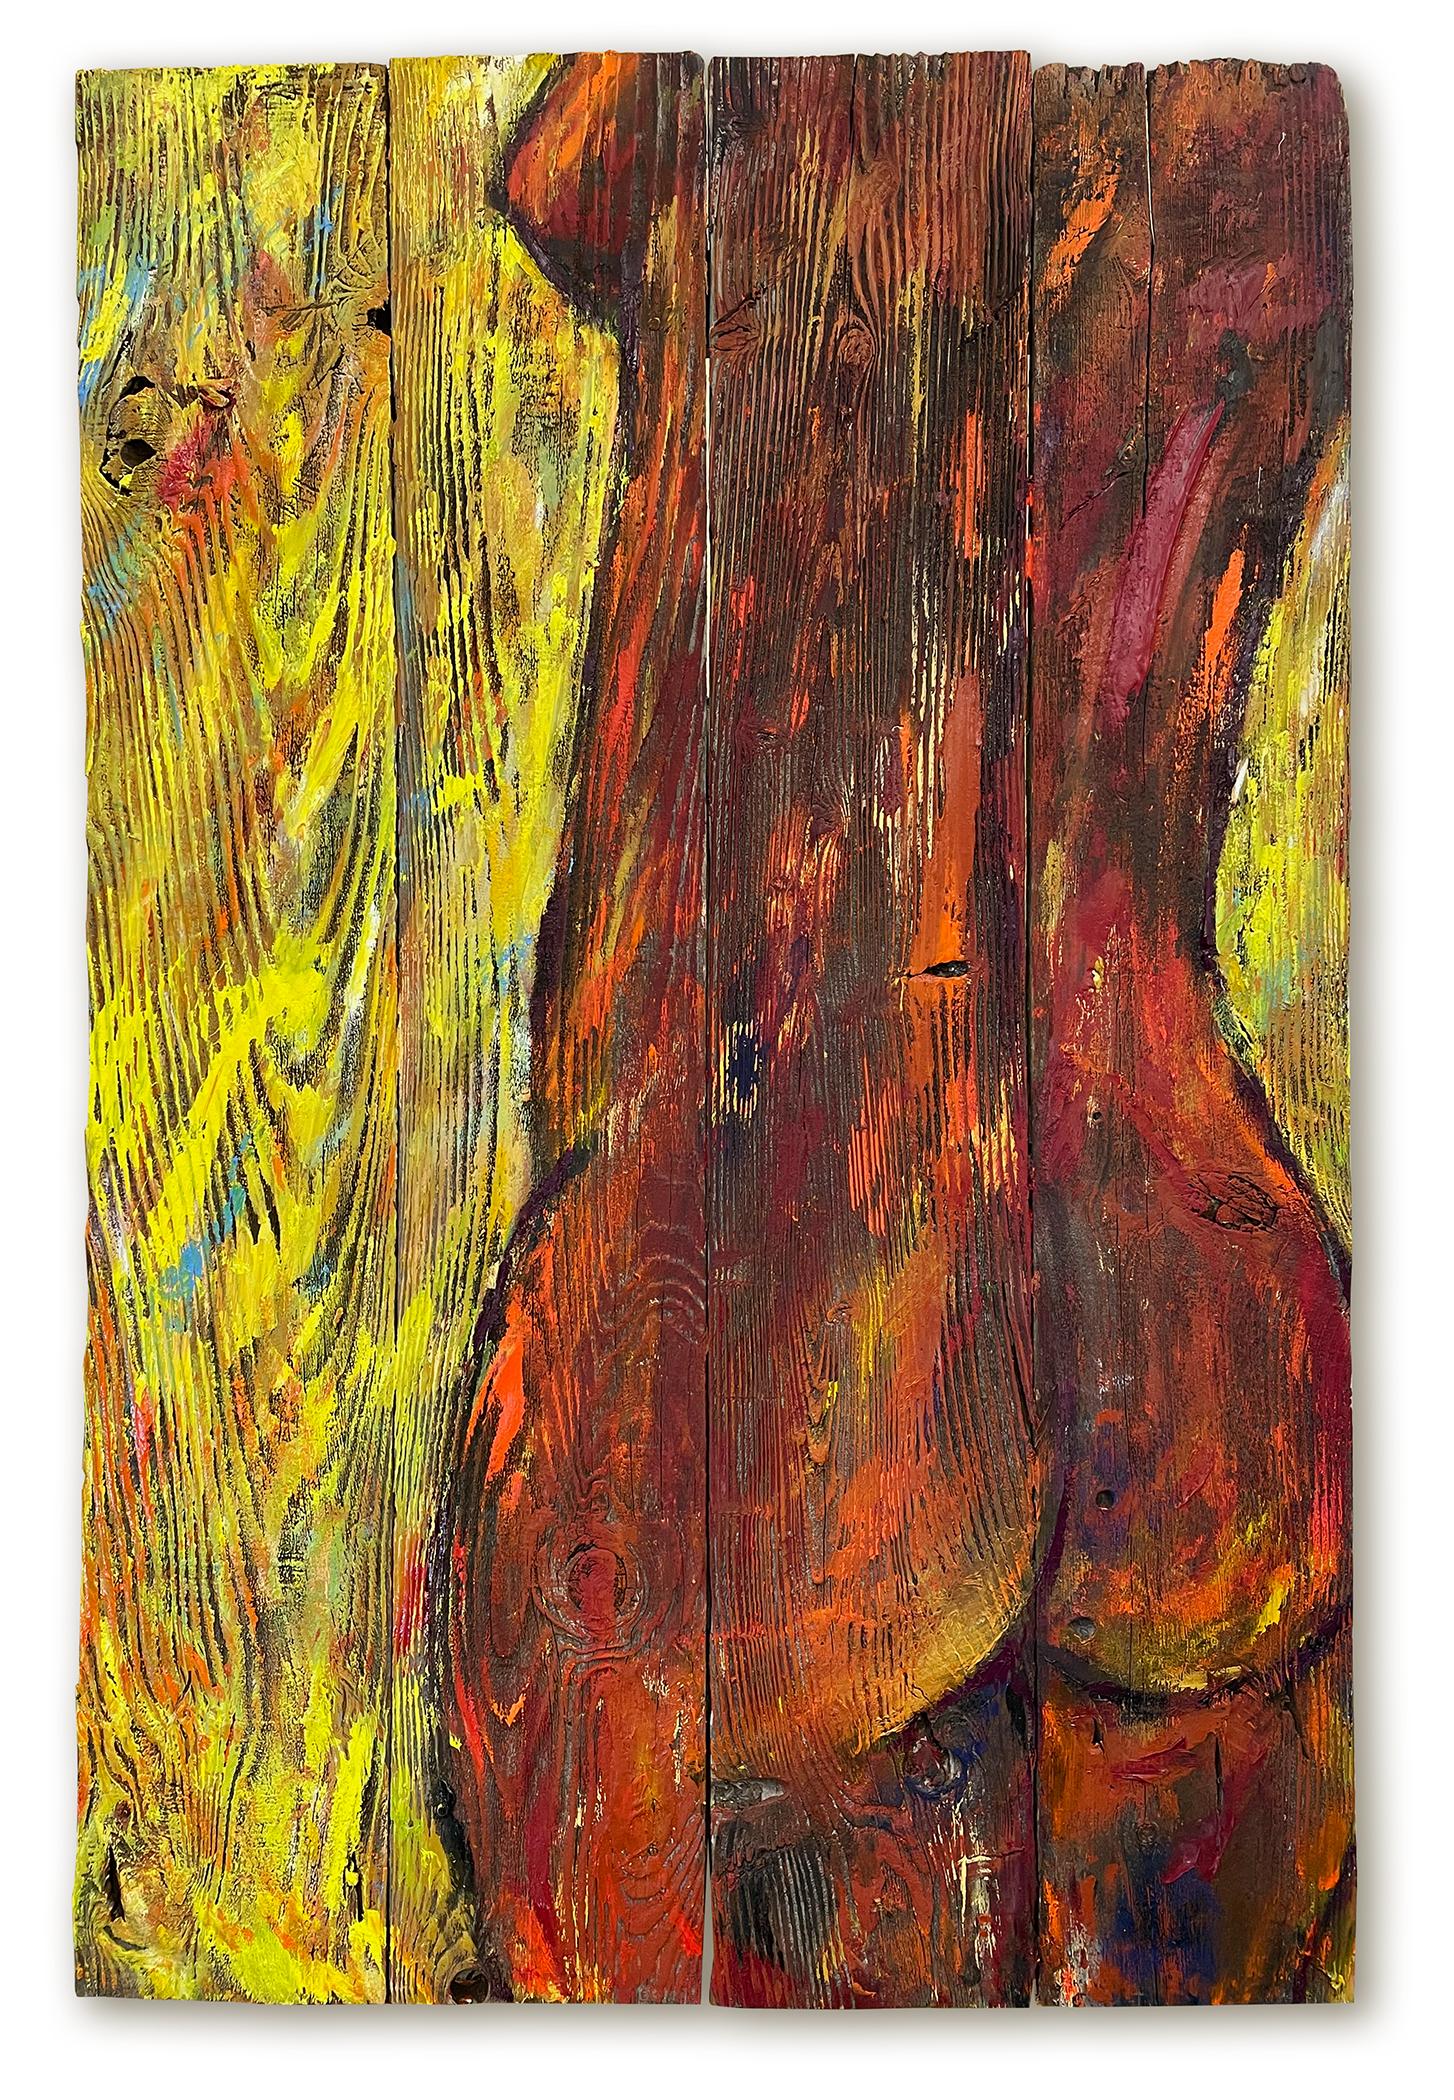 Kristy Chettle Nude Painting - 'Dances with Daffodils' - Colorful Textured Nude Woman - Vibrant Figurative 